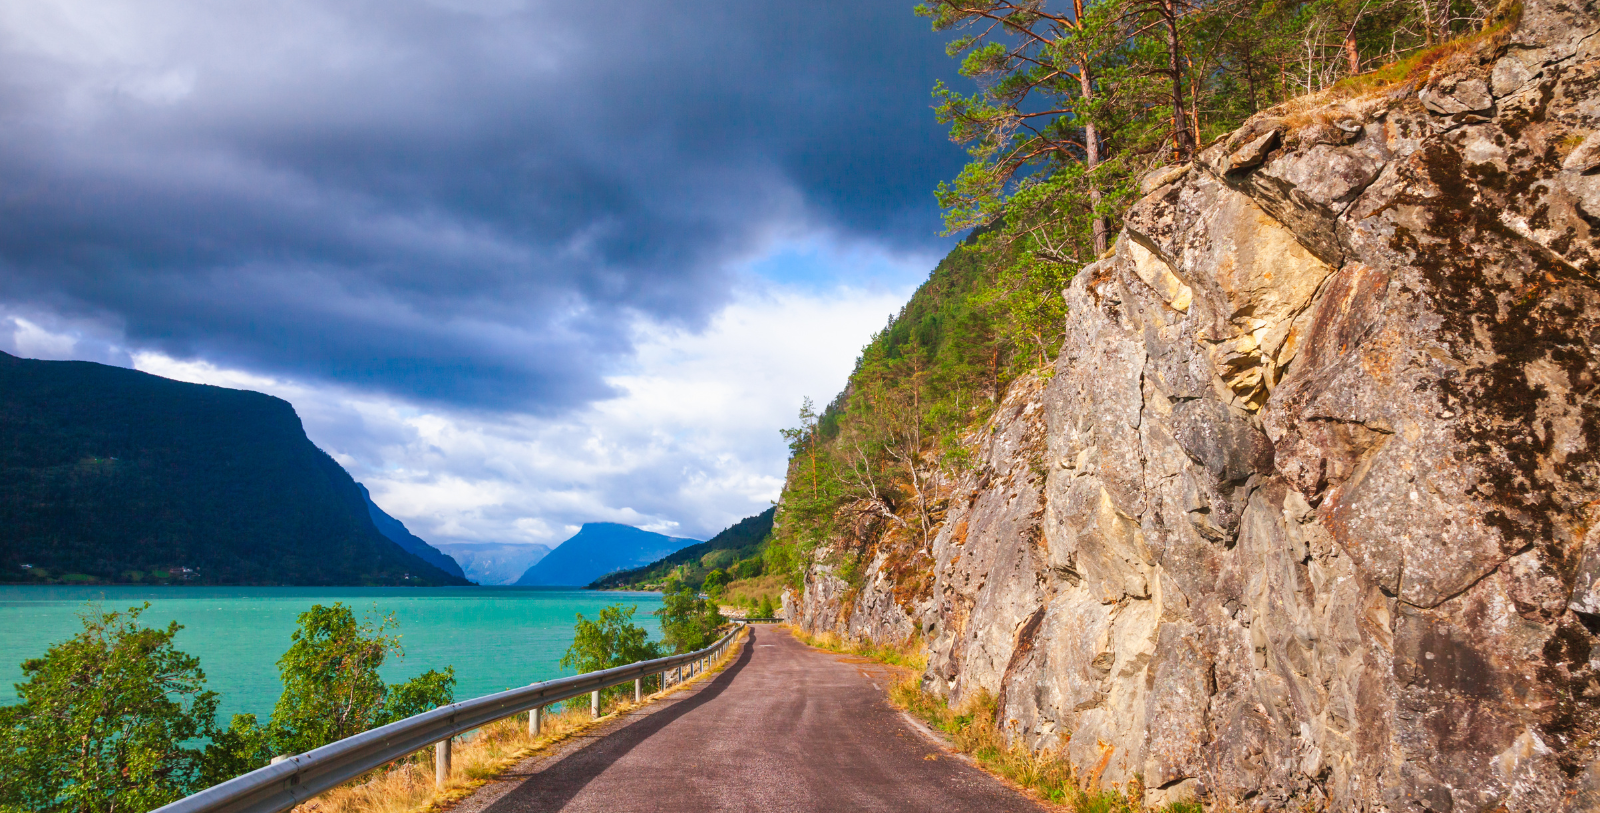 Adventure through the majestic Lustrafjord and Sognefjord and the pastoral communities that call them home by watercraft, bike, car, or on foot.